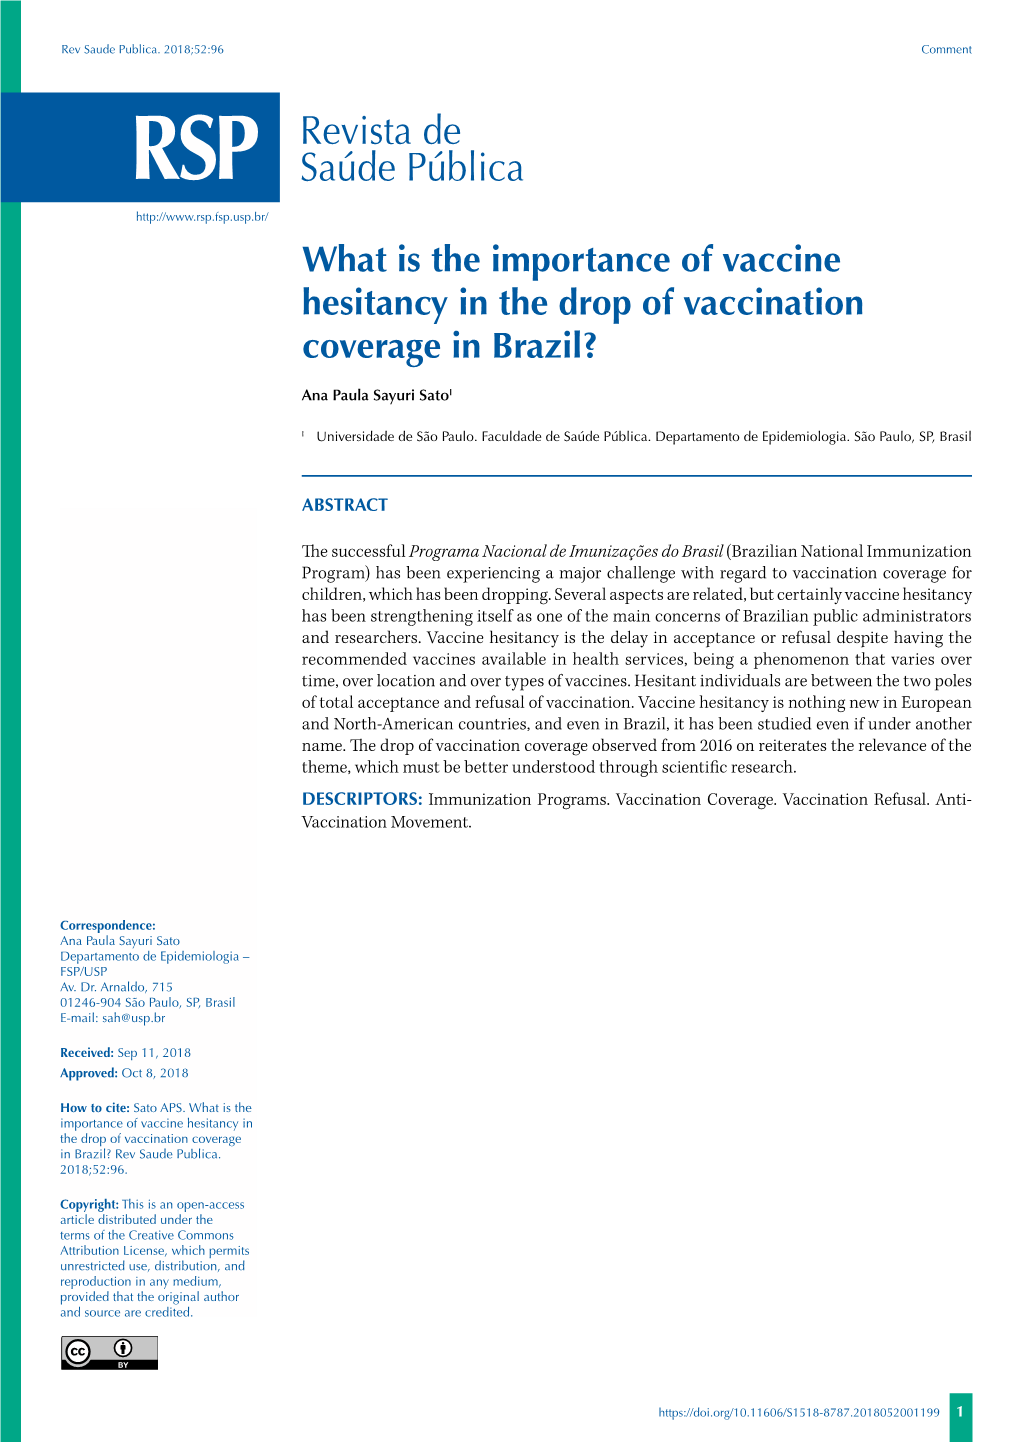 What Is the Importance of Vaccine Hesitancy in the Drop of Vaccination Coverage in Brazil?